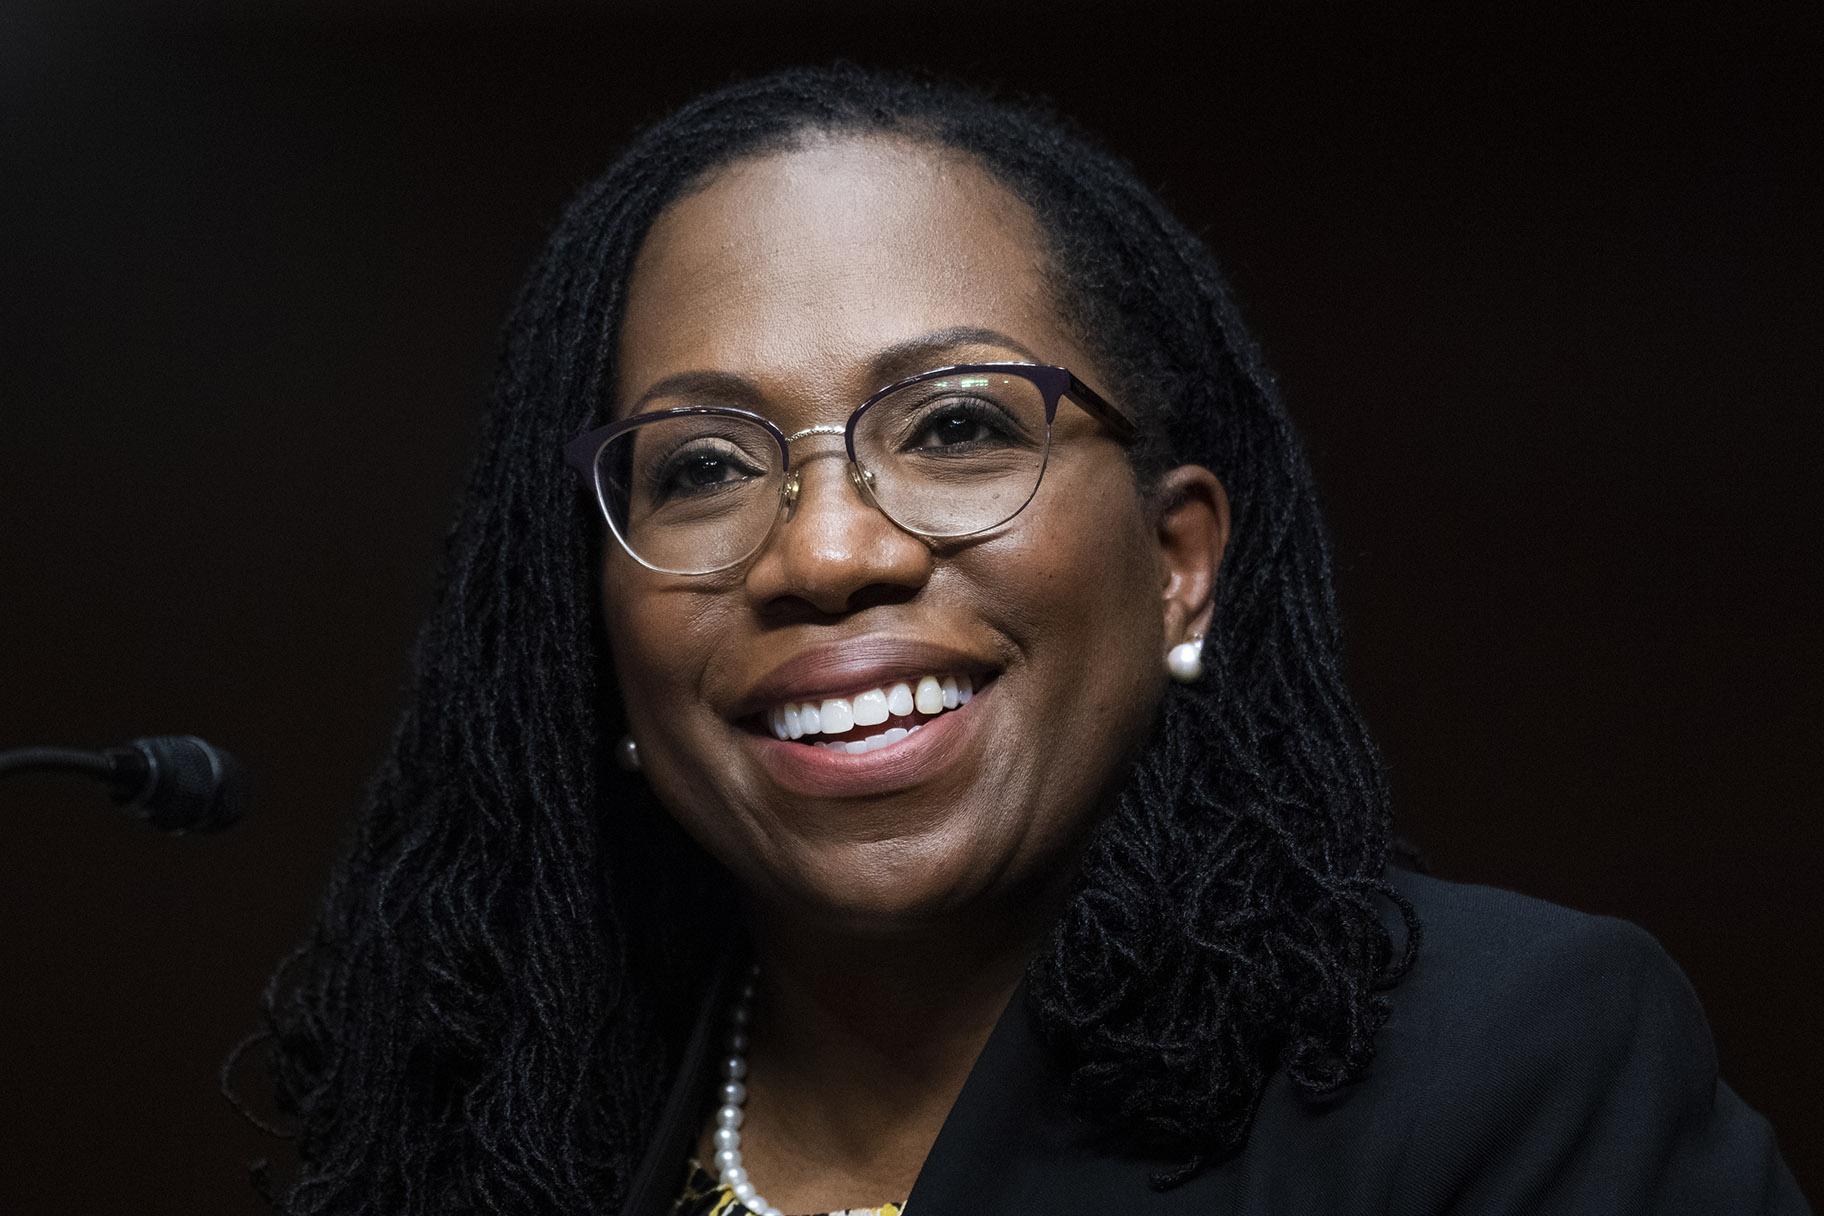 Ketanji Brown Jackson, nominated to be a U.S. Circuit Judge for the District of Columbia Circuit, testifies before a Senate Judiciary Committee hearing on pending judicial nominations on Capitol Hill in Washington on April 28, 2021. (Tom Williams / Pool via AP, File)